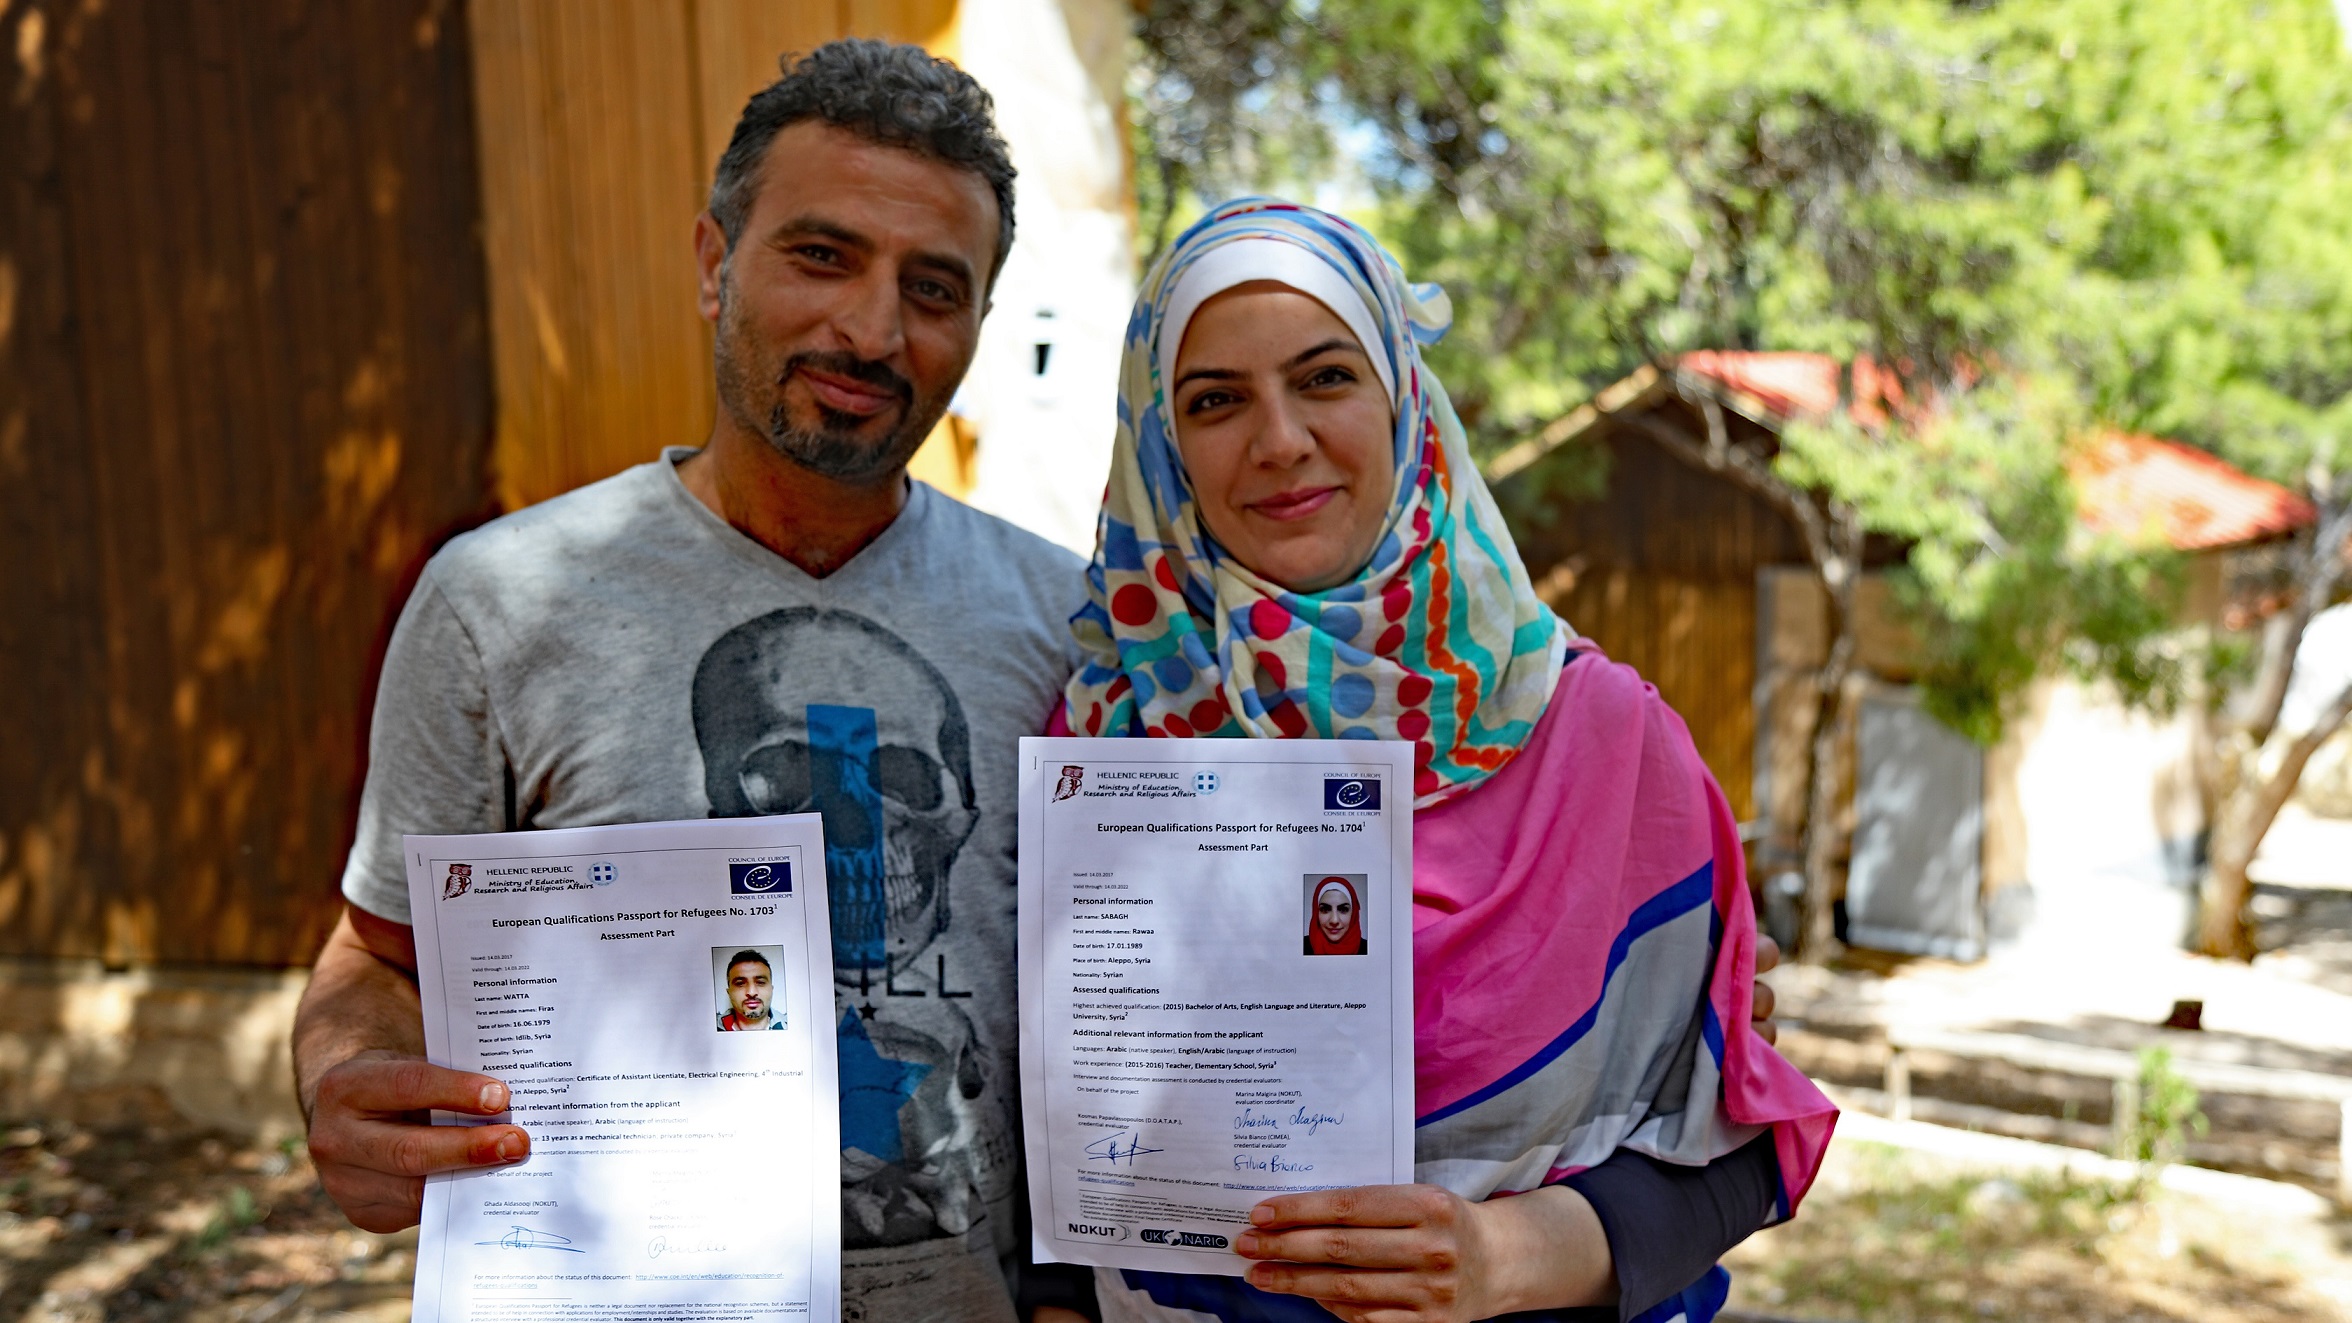 Recognizing refugee qualifications – A virtuous circle